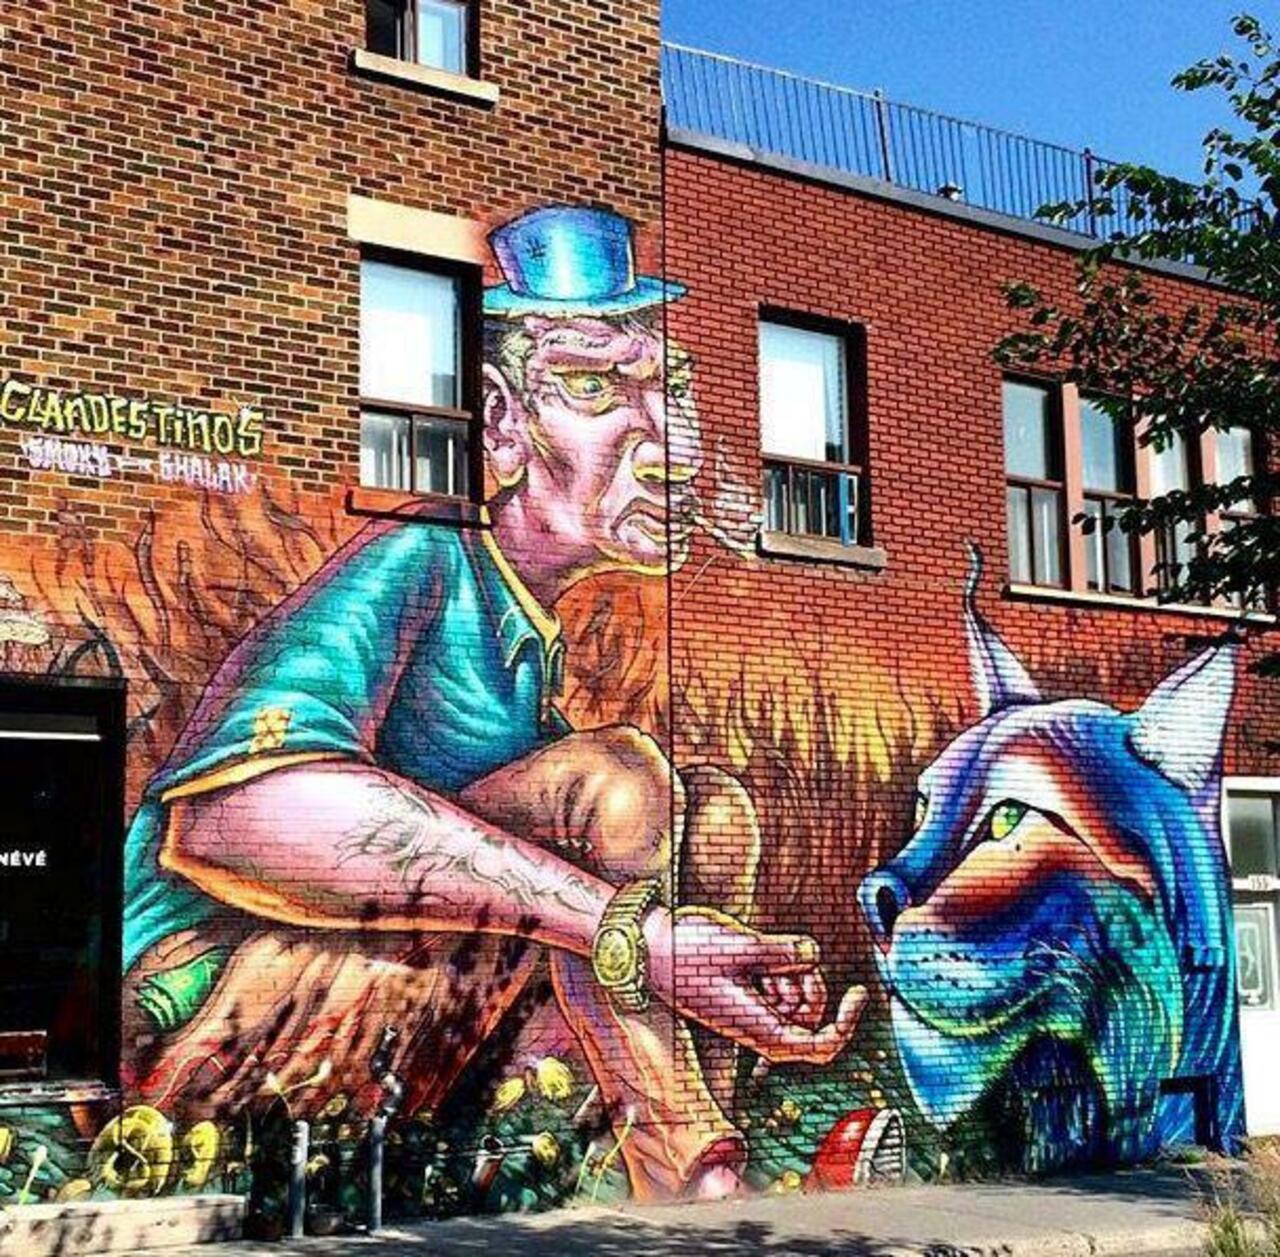 #switch a wall into #streetart by #brunosmojey and #shalak in #montreal #bedifferent #graffiti #art #arte http://t.co/SMxuZBdqeW